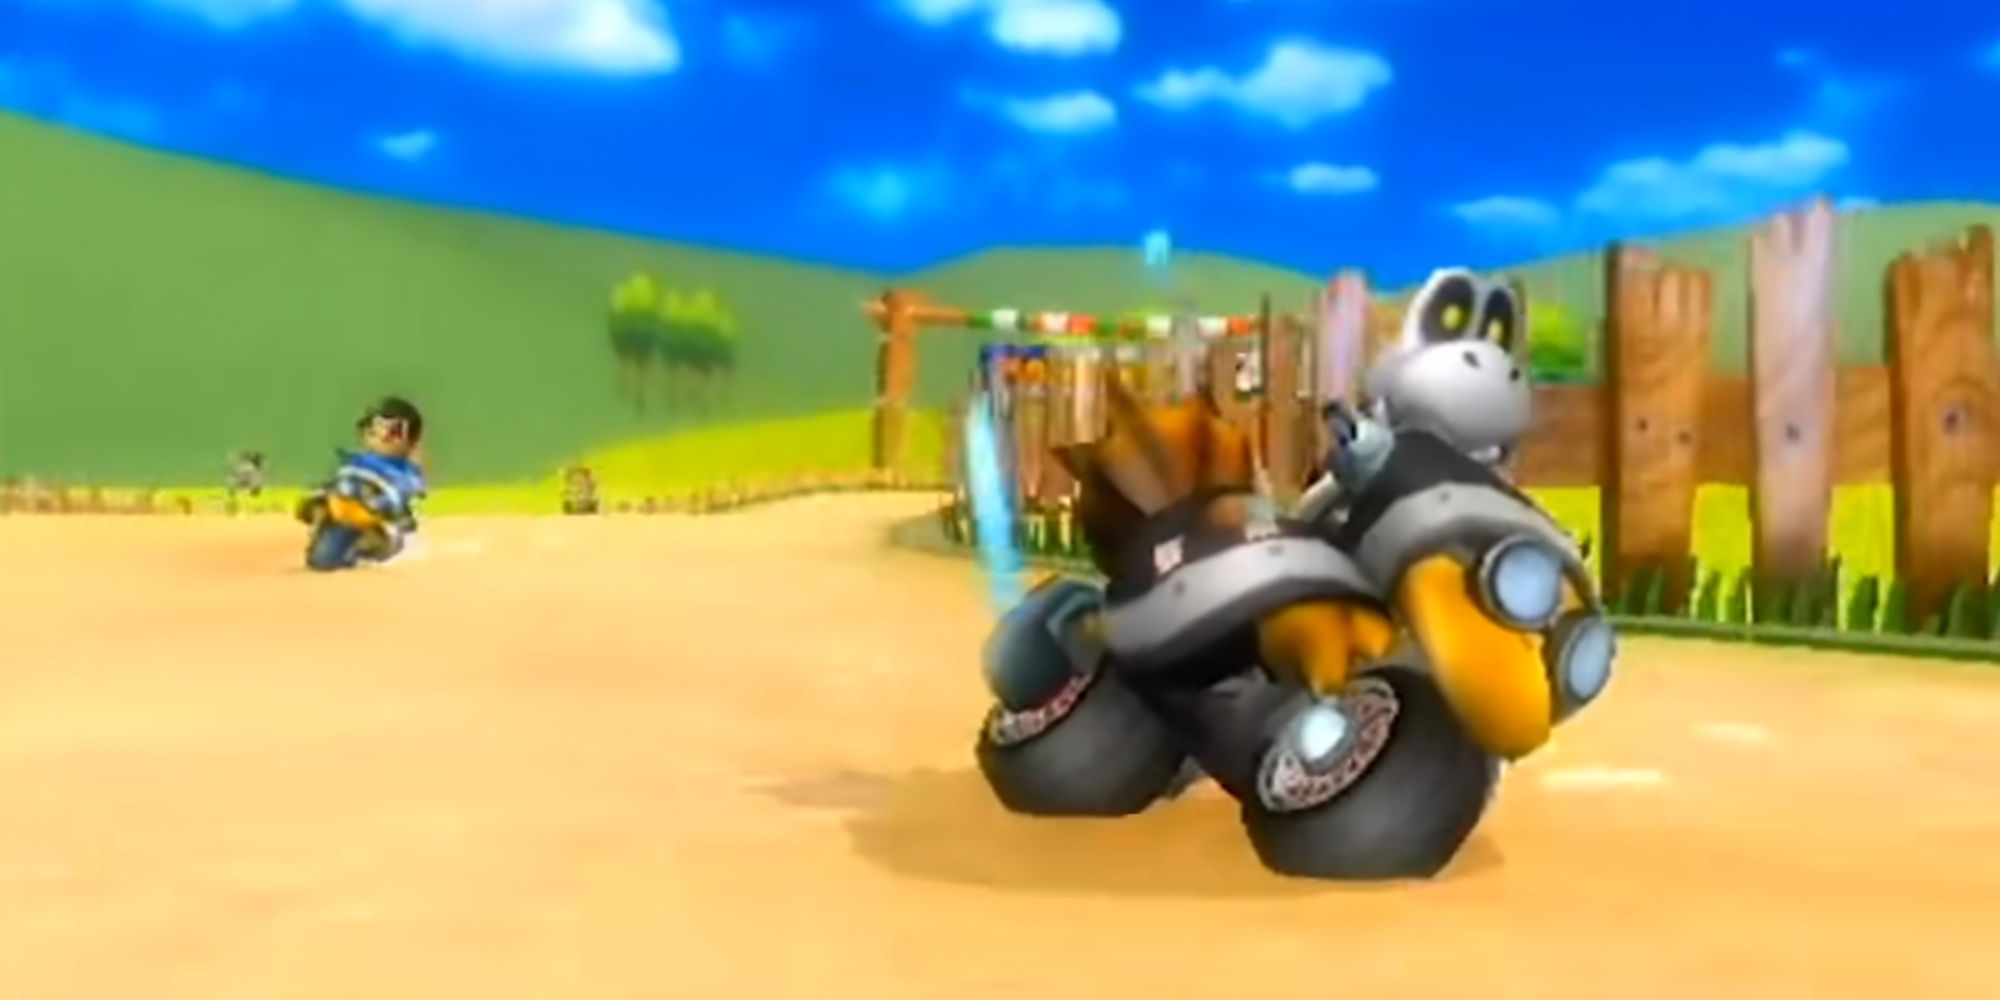 Mario Kart Vehicle Designs Dry Bones racing on the Magikoopa bike on Moo Moo Meadows with an opponent not far behind